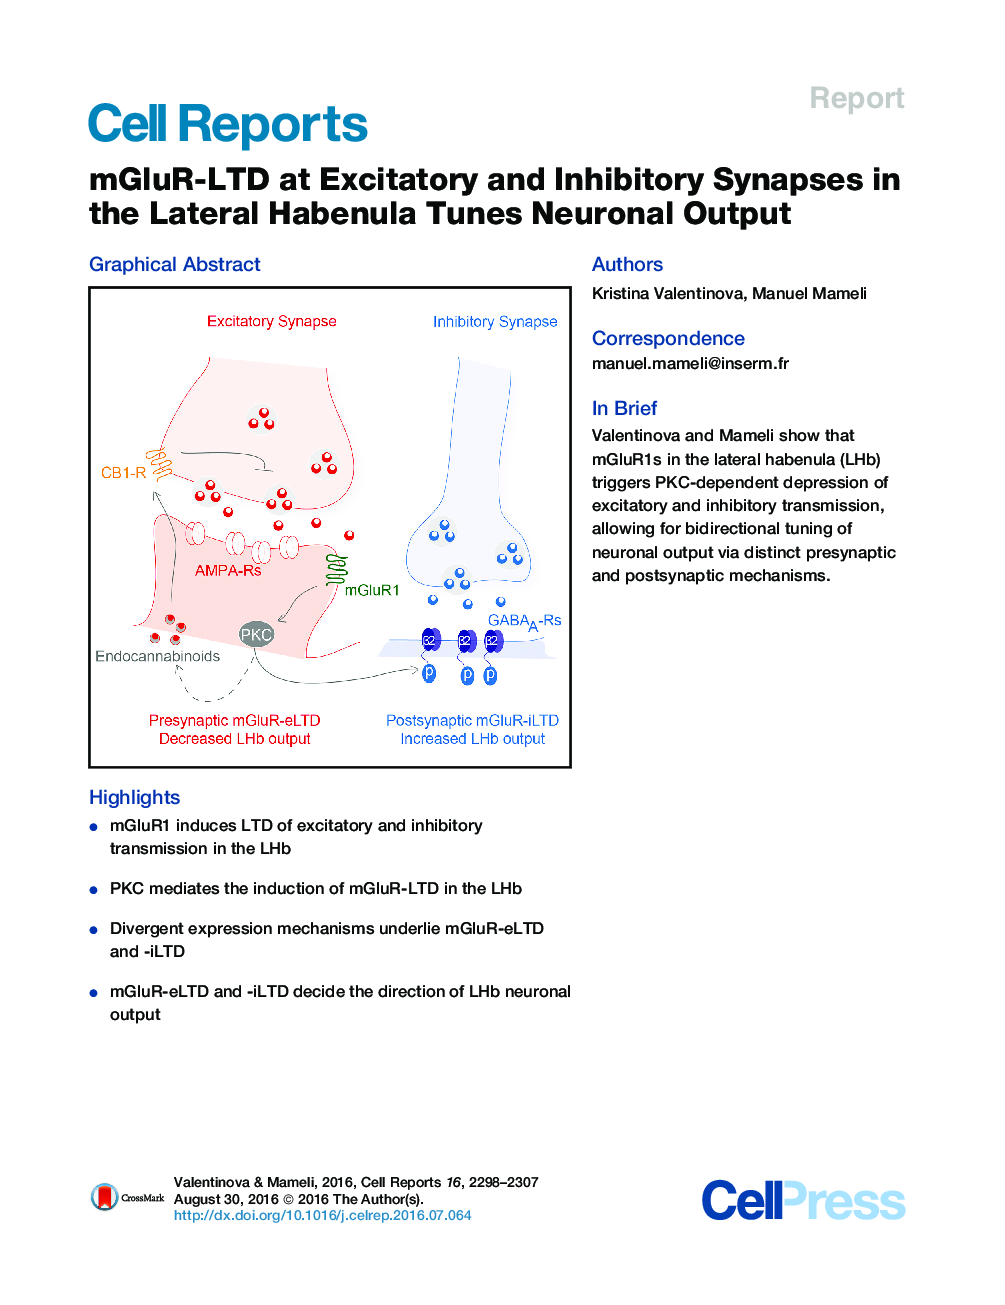 mGluR-LTD at Excitatory and Inhibitory Synapses in the Lateral Habenula Tunes Neuronal Output